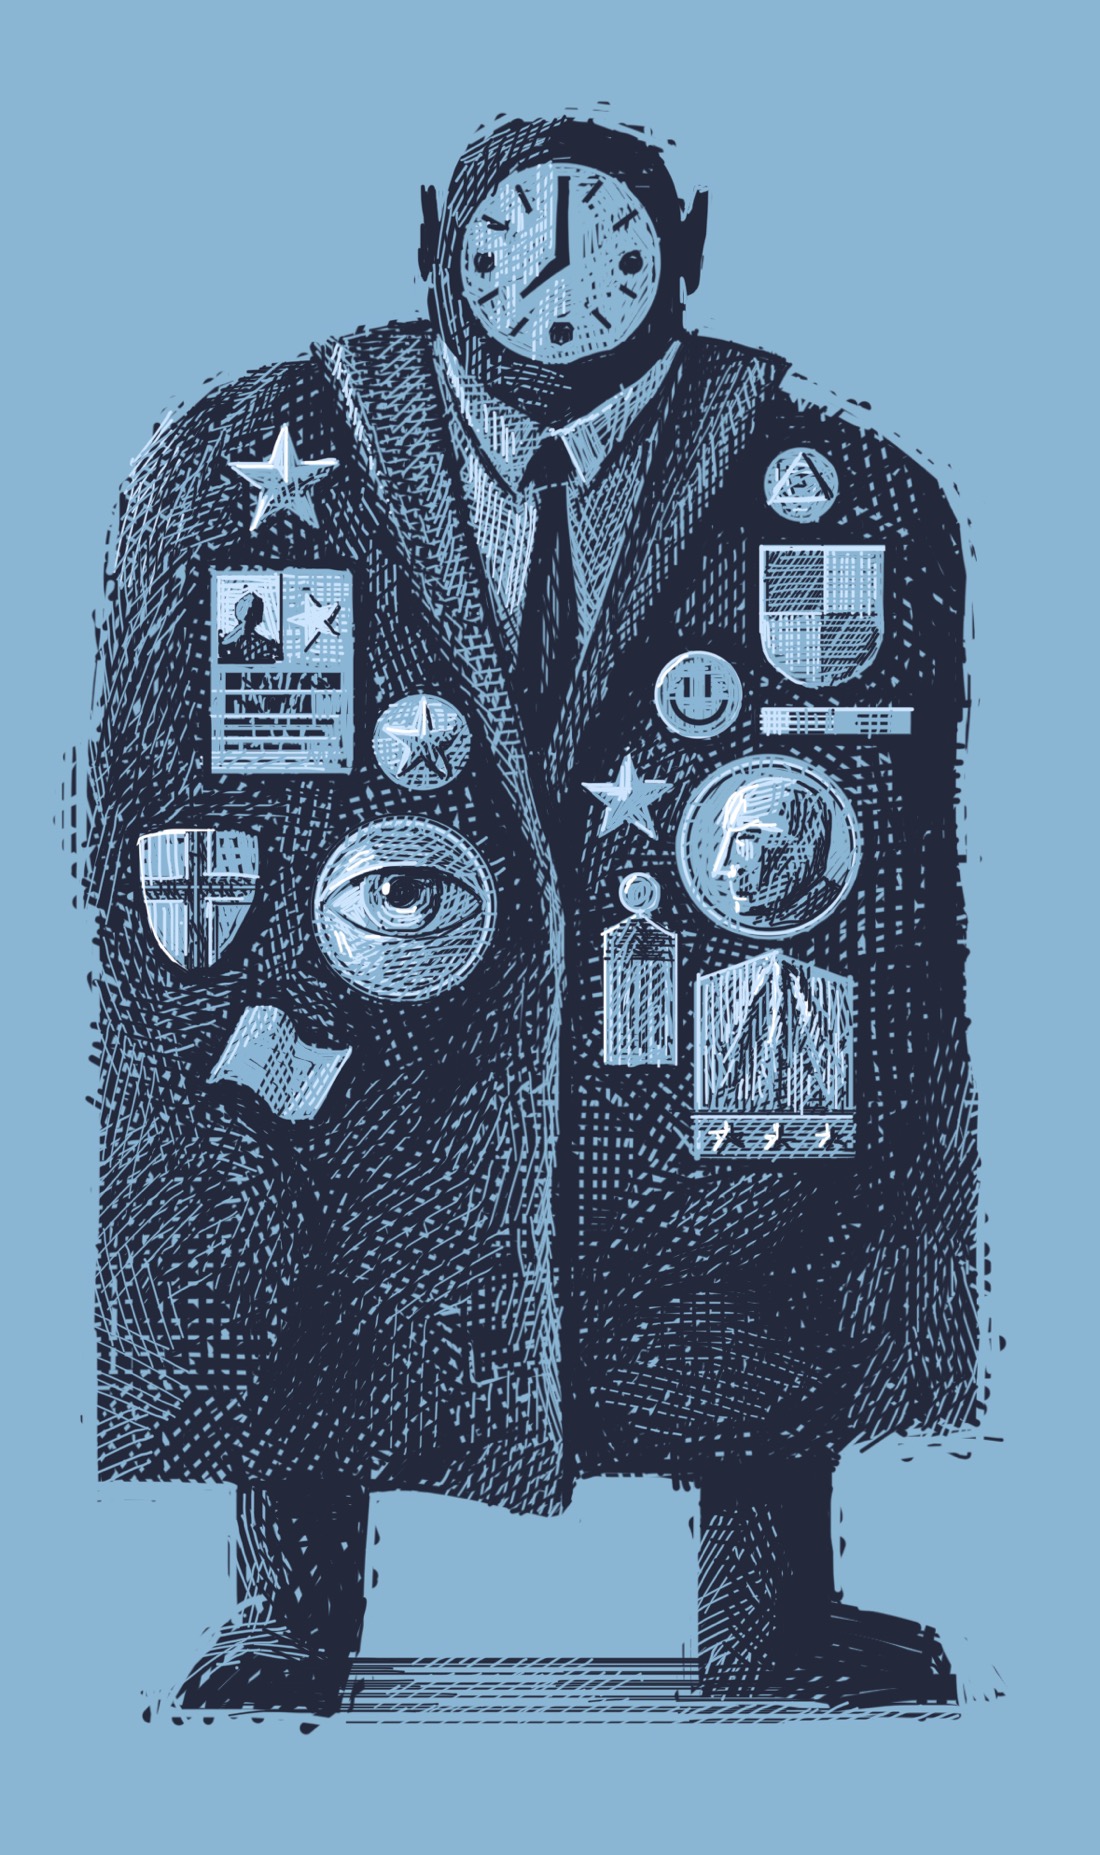 A large person wearing a shirt, a tie, a vast overcoat, and heavy military boots stands alone. The person's head is shaved; they have an analog clock for a face. Pinned to the overcoat is a wild, ostentatious array of various medals, pins, and badges.